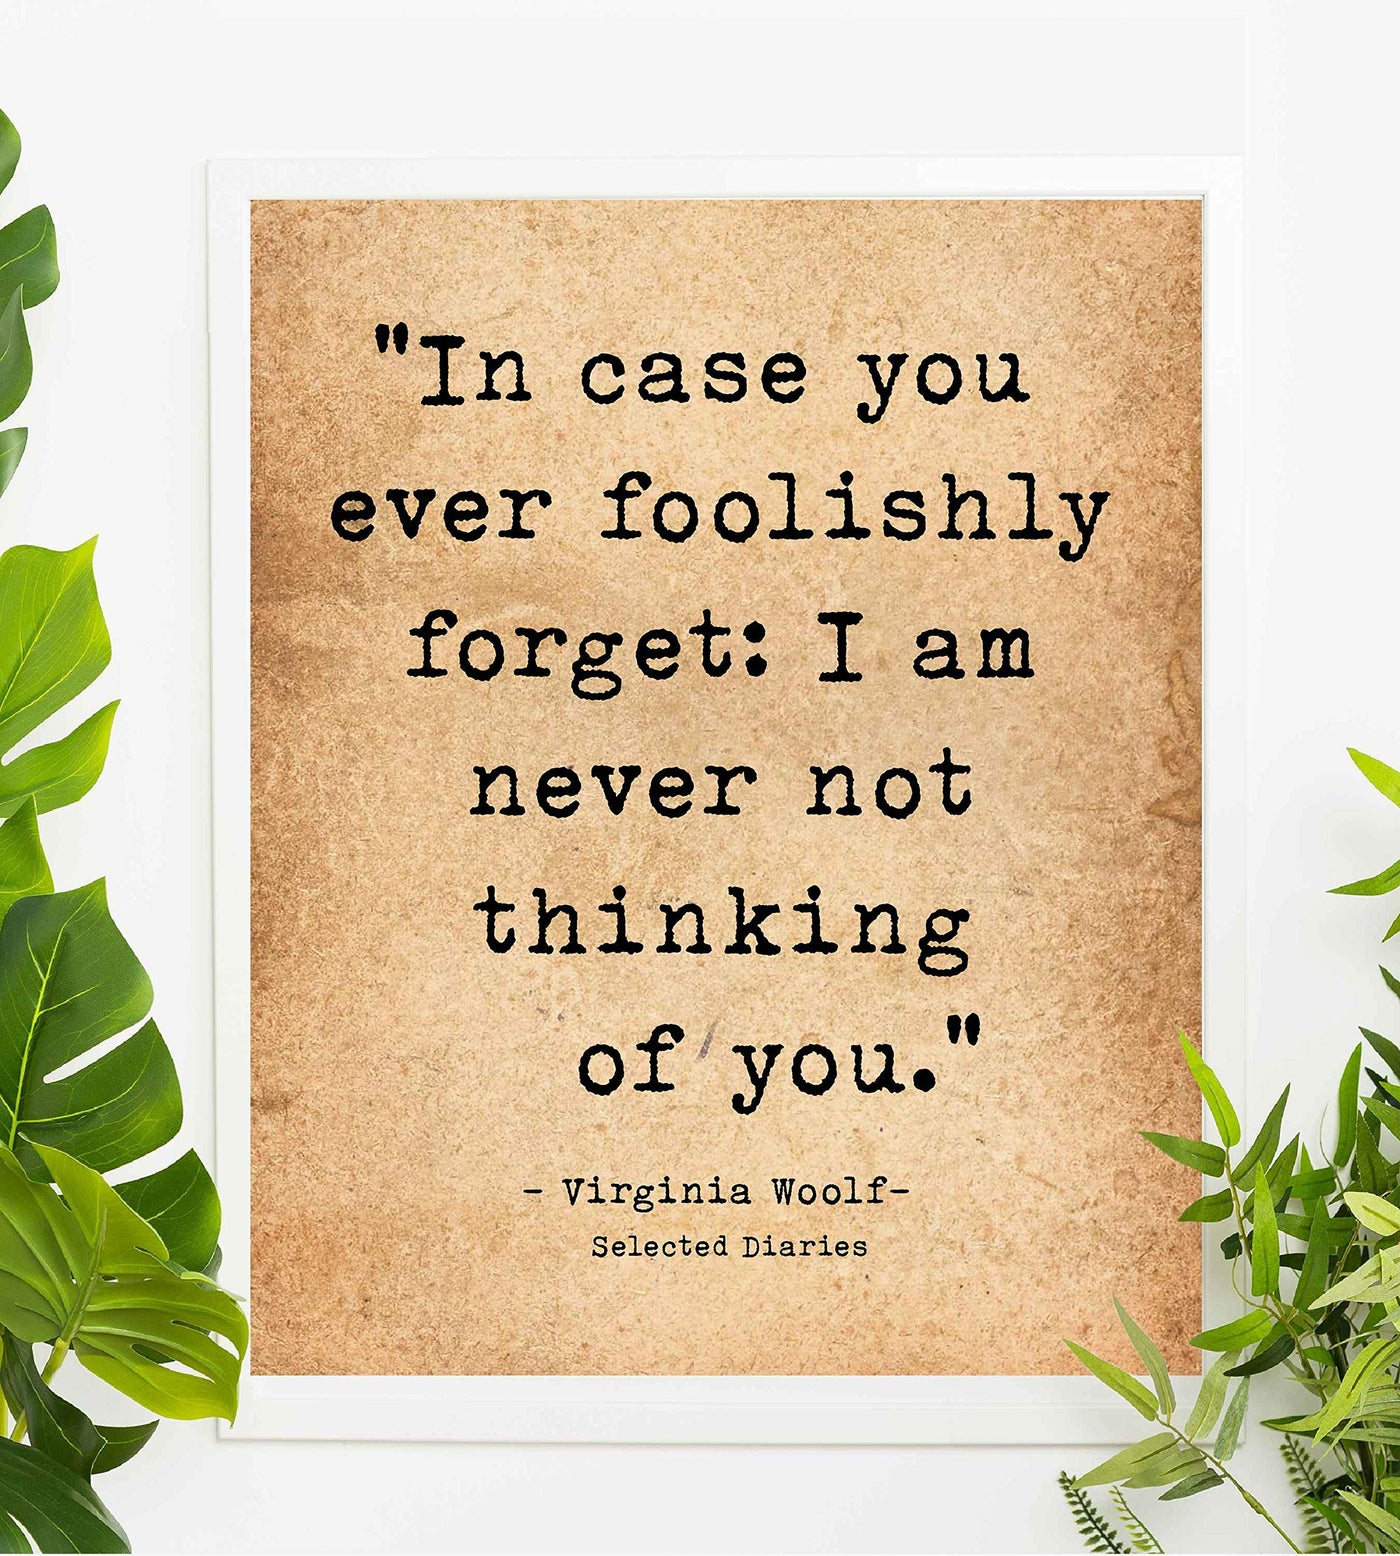 In Case You Ever Foolishly Forget-Virginia Woolf Quotes- 8 x 10" Vintage Romantic Wall Art-Ready to Frame. Love Quotes Poster Print for Home-Bedroom-Office-Dorm Decor. Great Inspirational Gift!